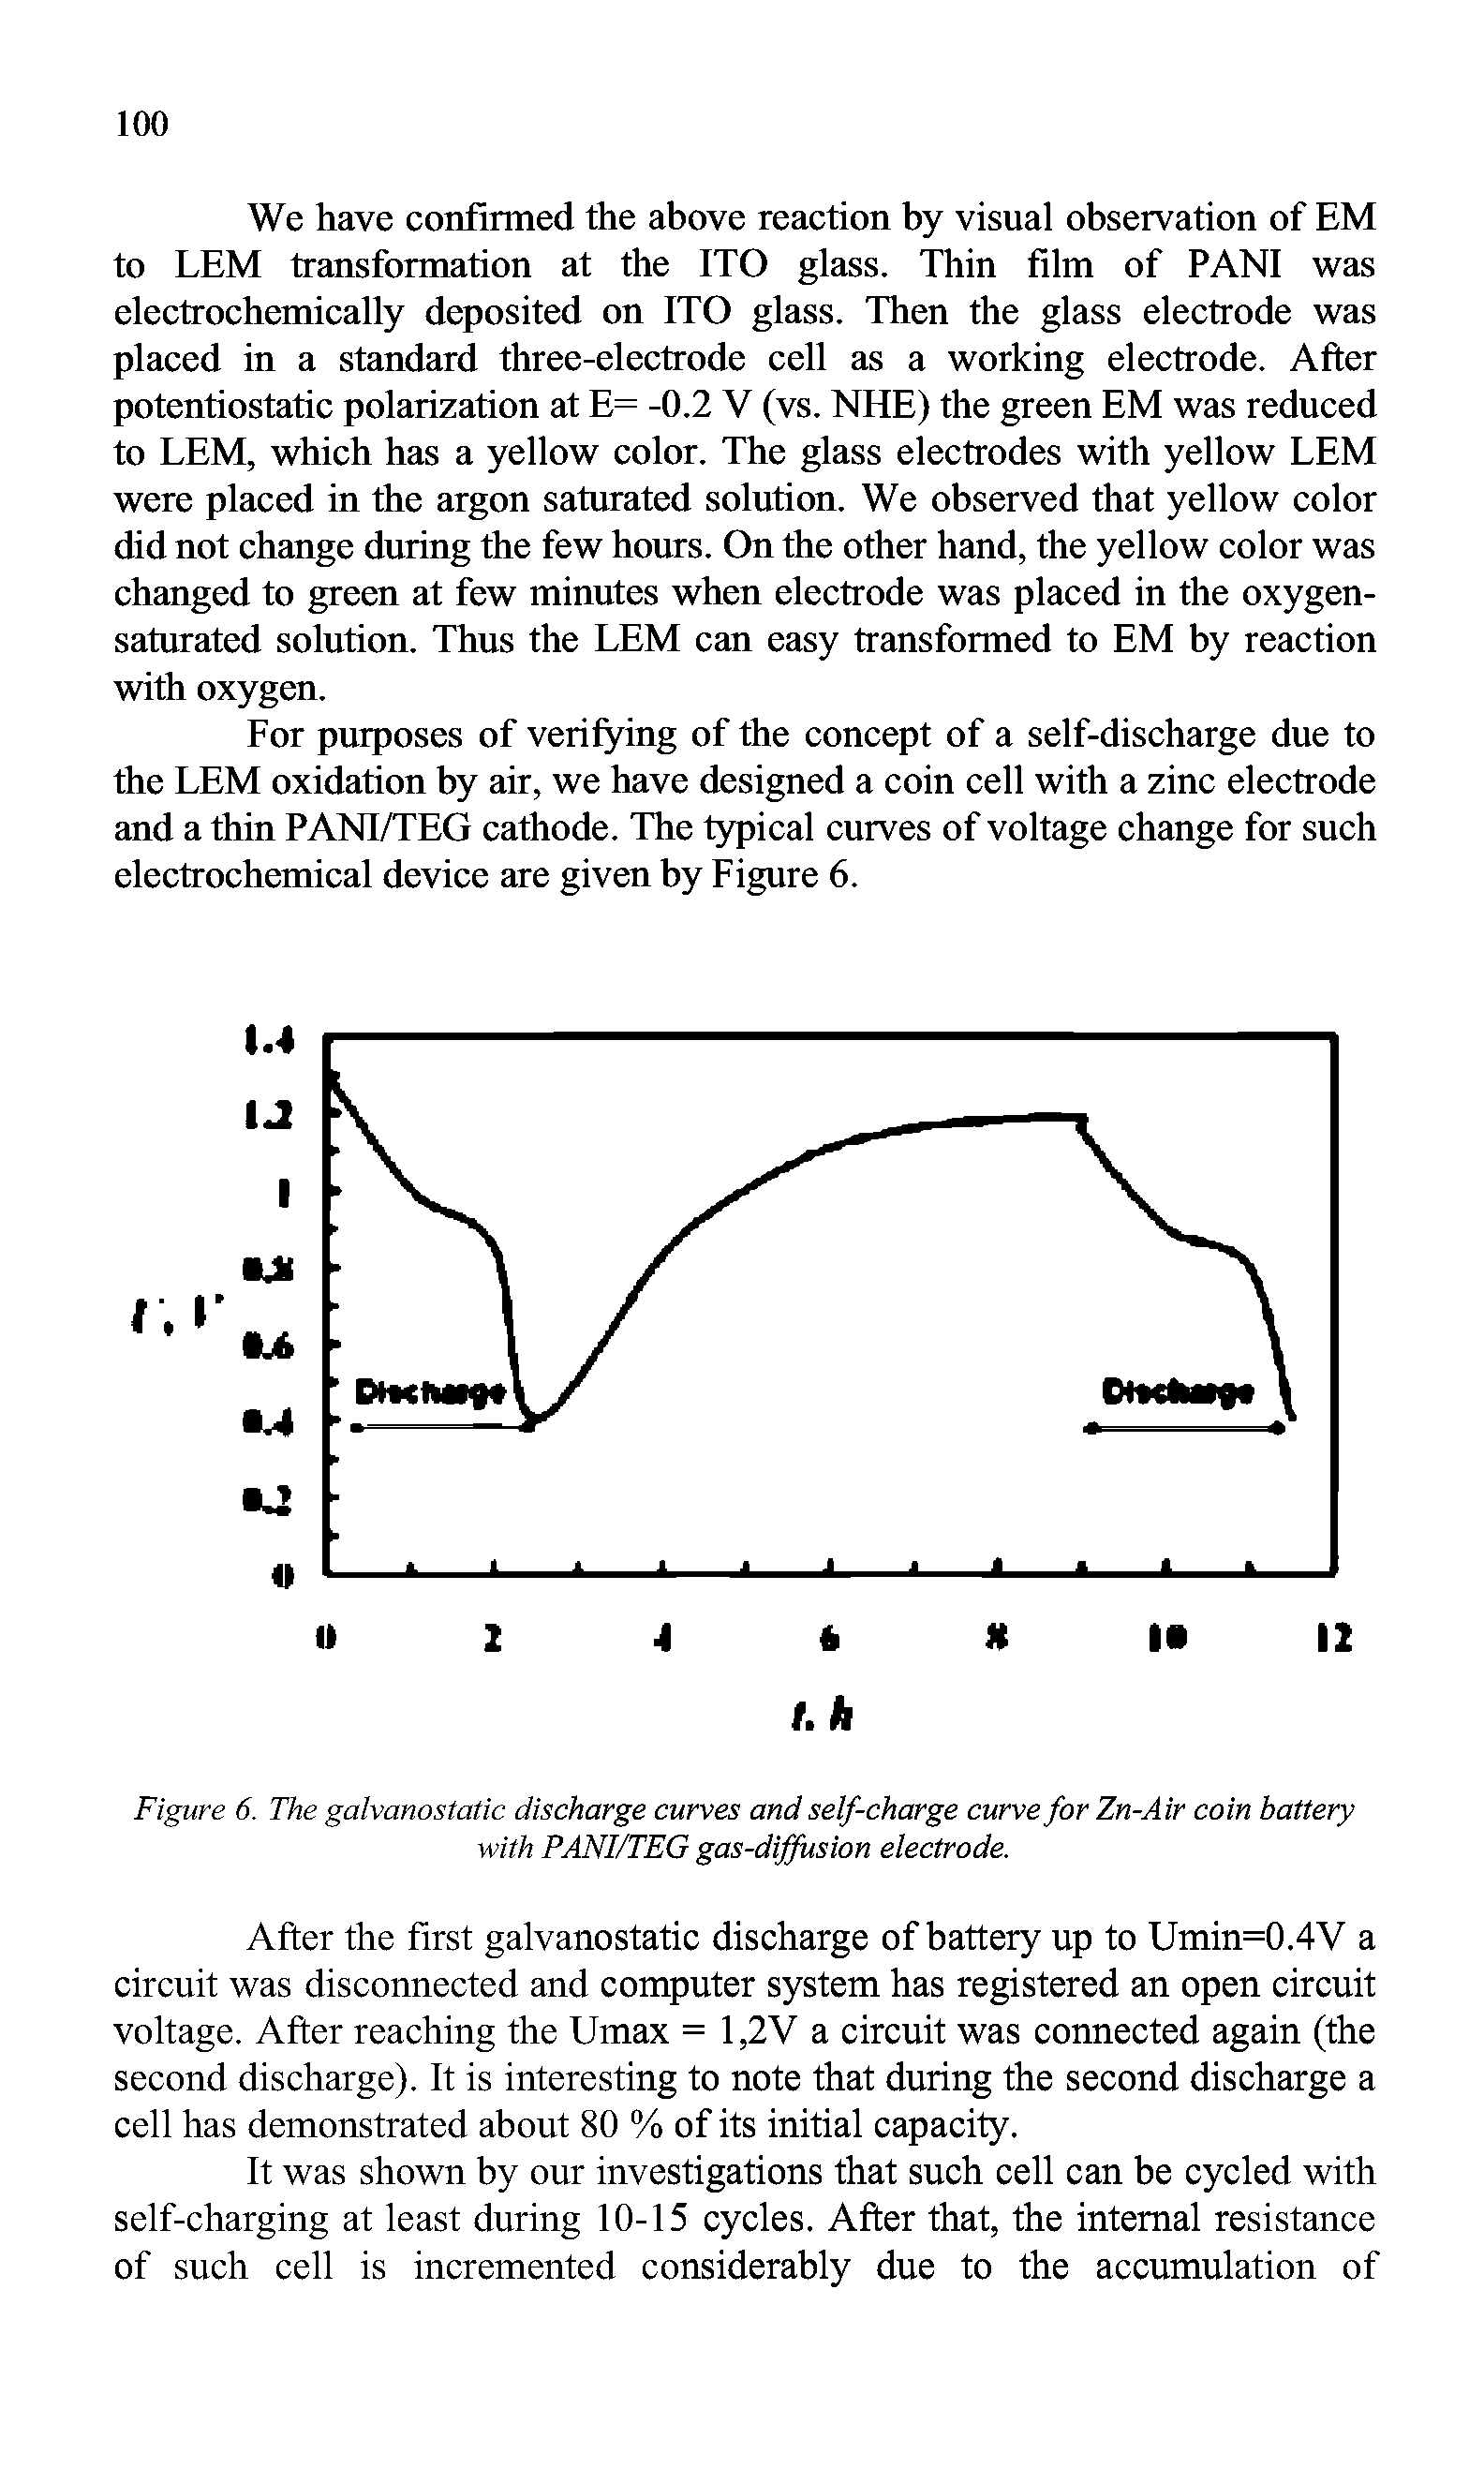 Figure 6. The galvanostatic discharge curves and self-charge curve for Zn-Air coin battery with PANI/TEG gas-diffusion electrode.